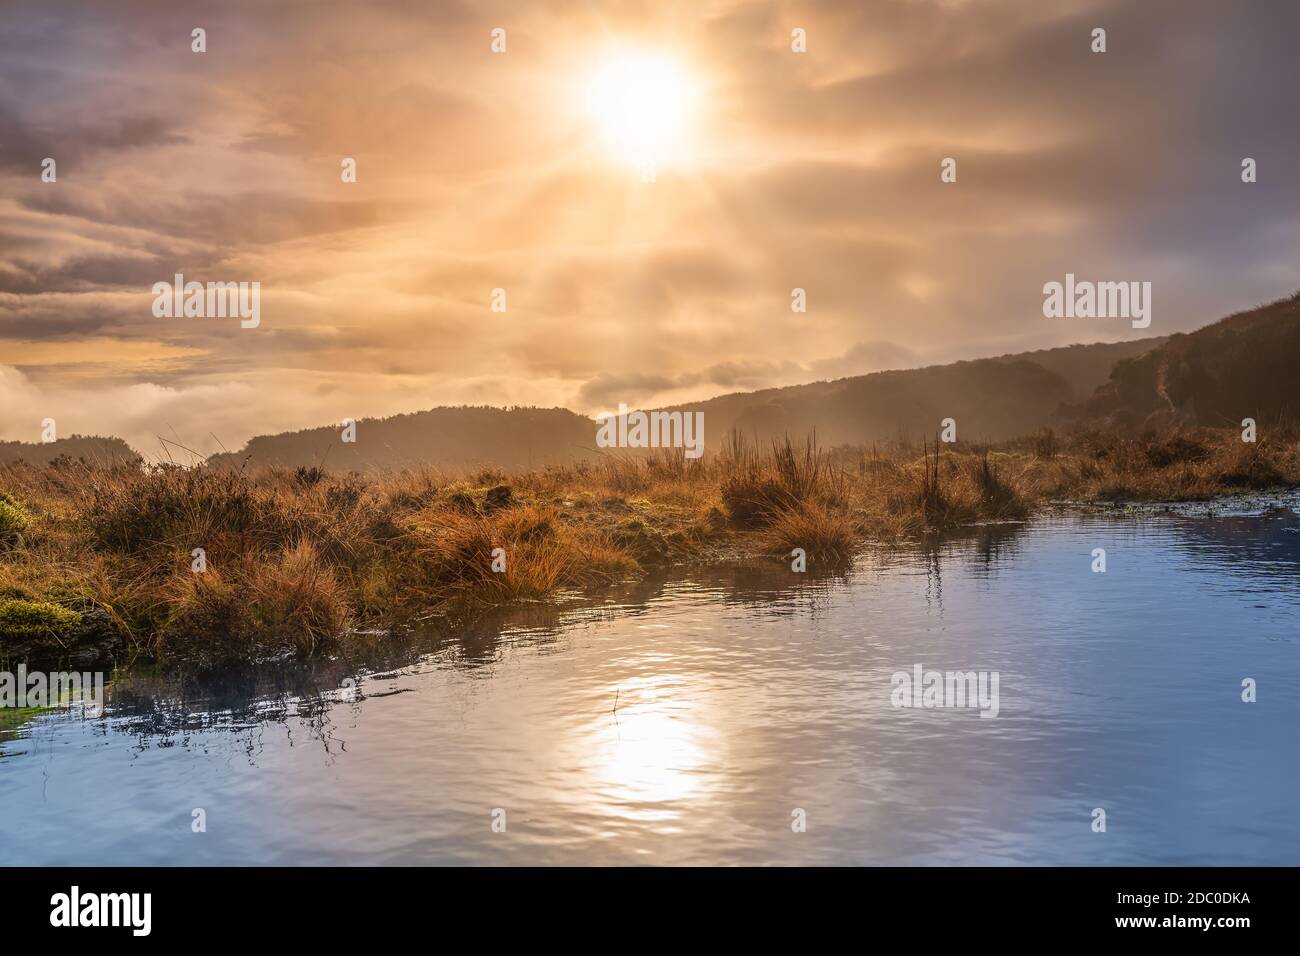 Fog, mist and dramatic sky over a swamp or bog with sun reflecting in a lake. Dramatic landscape of Wicklow mountains, Ireland Stock Photo